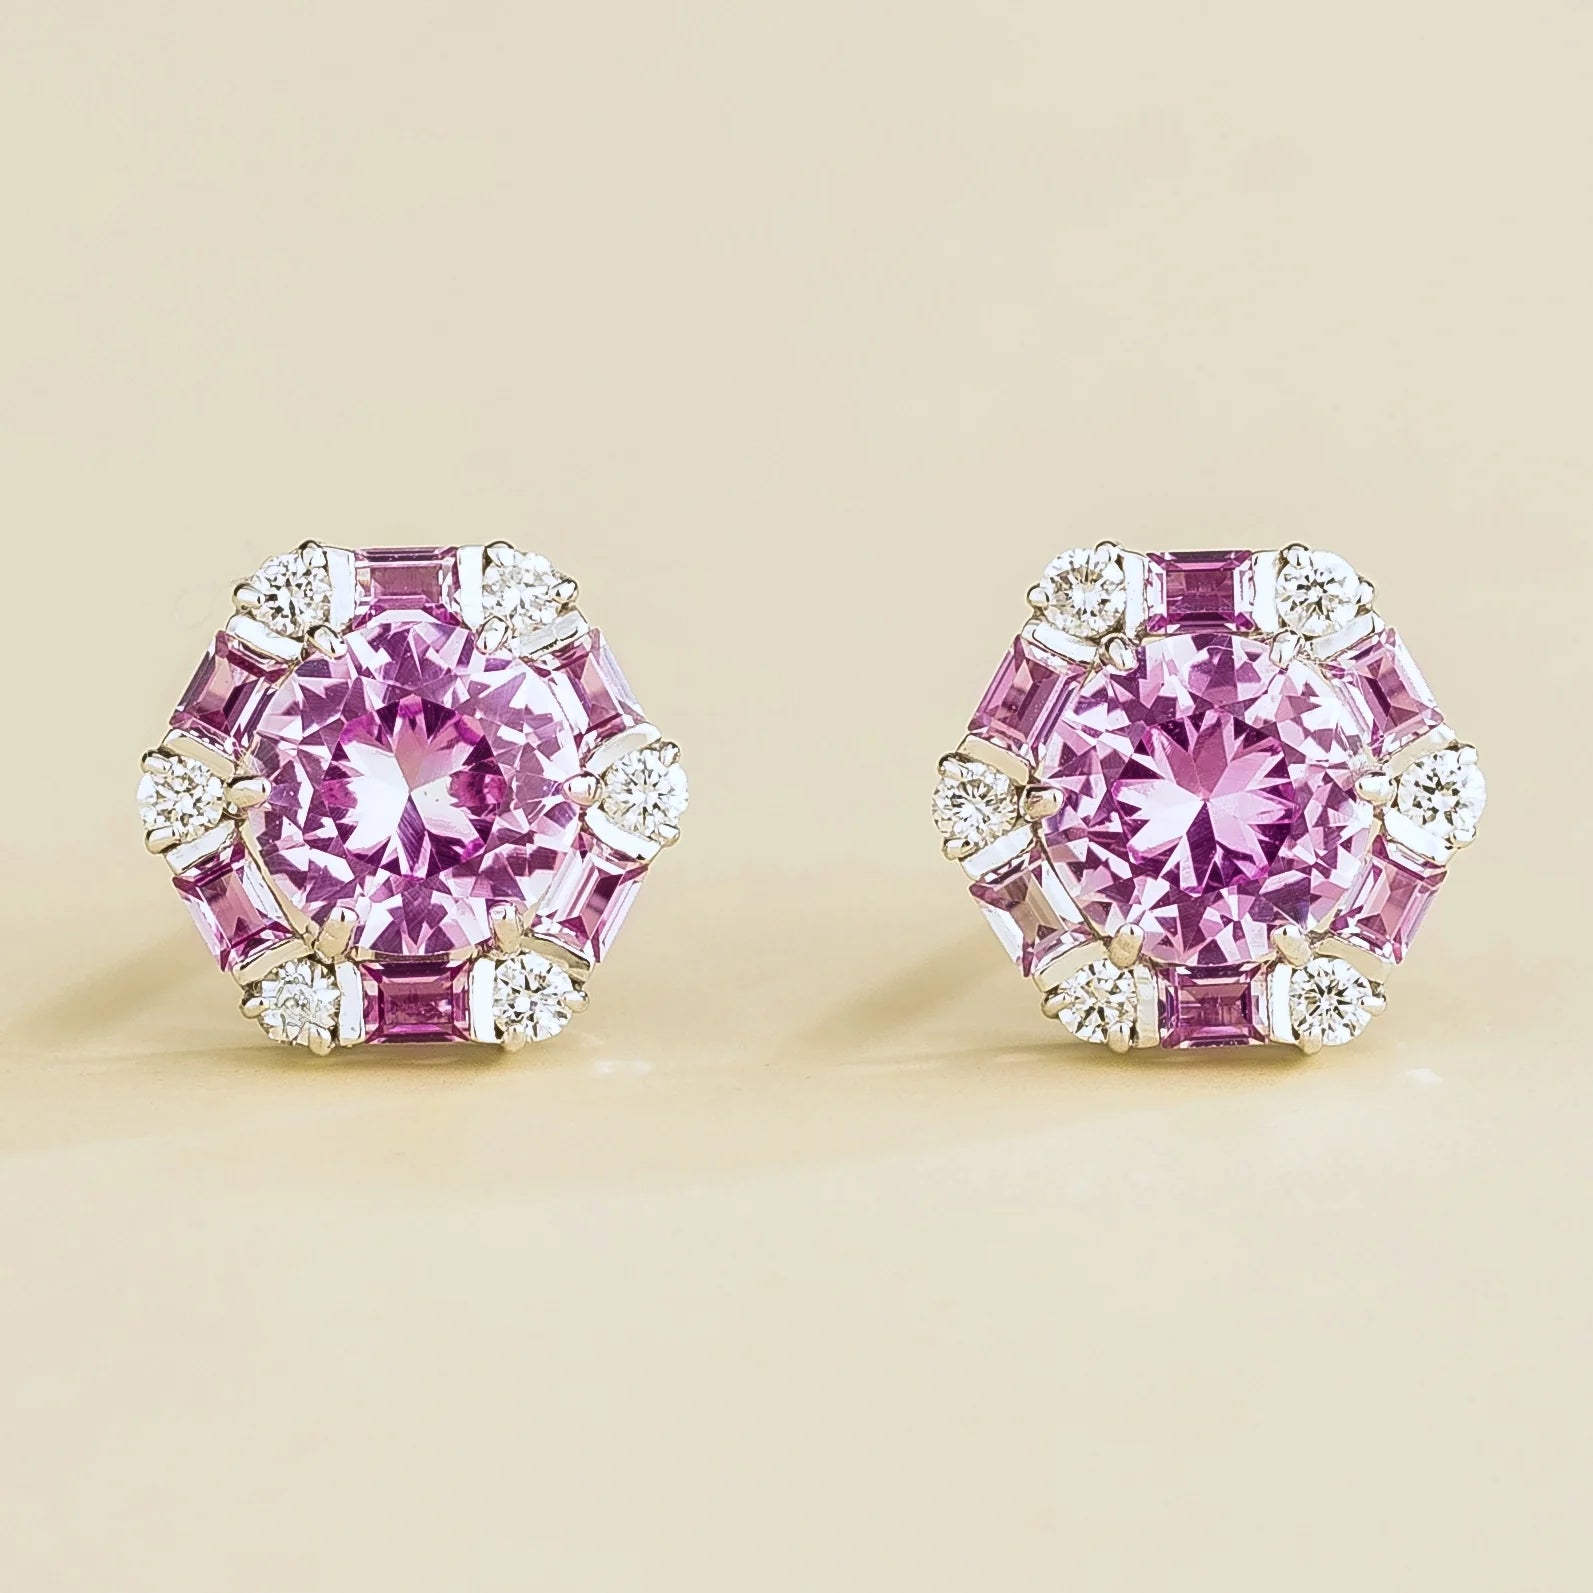 Melba White Gold Earrings Set With Pink Sapphire and Diamond From Bespoke Jewellery London